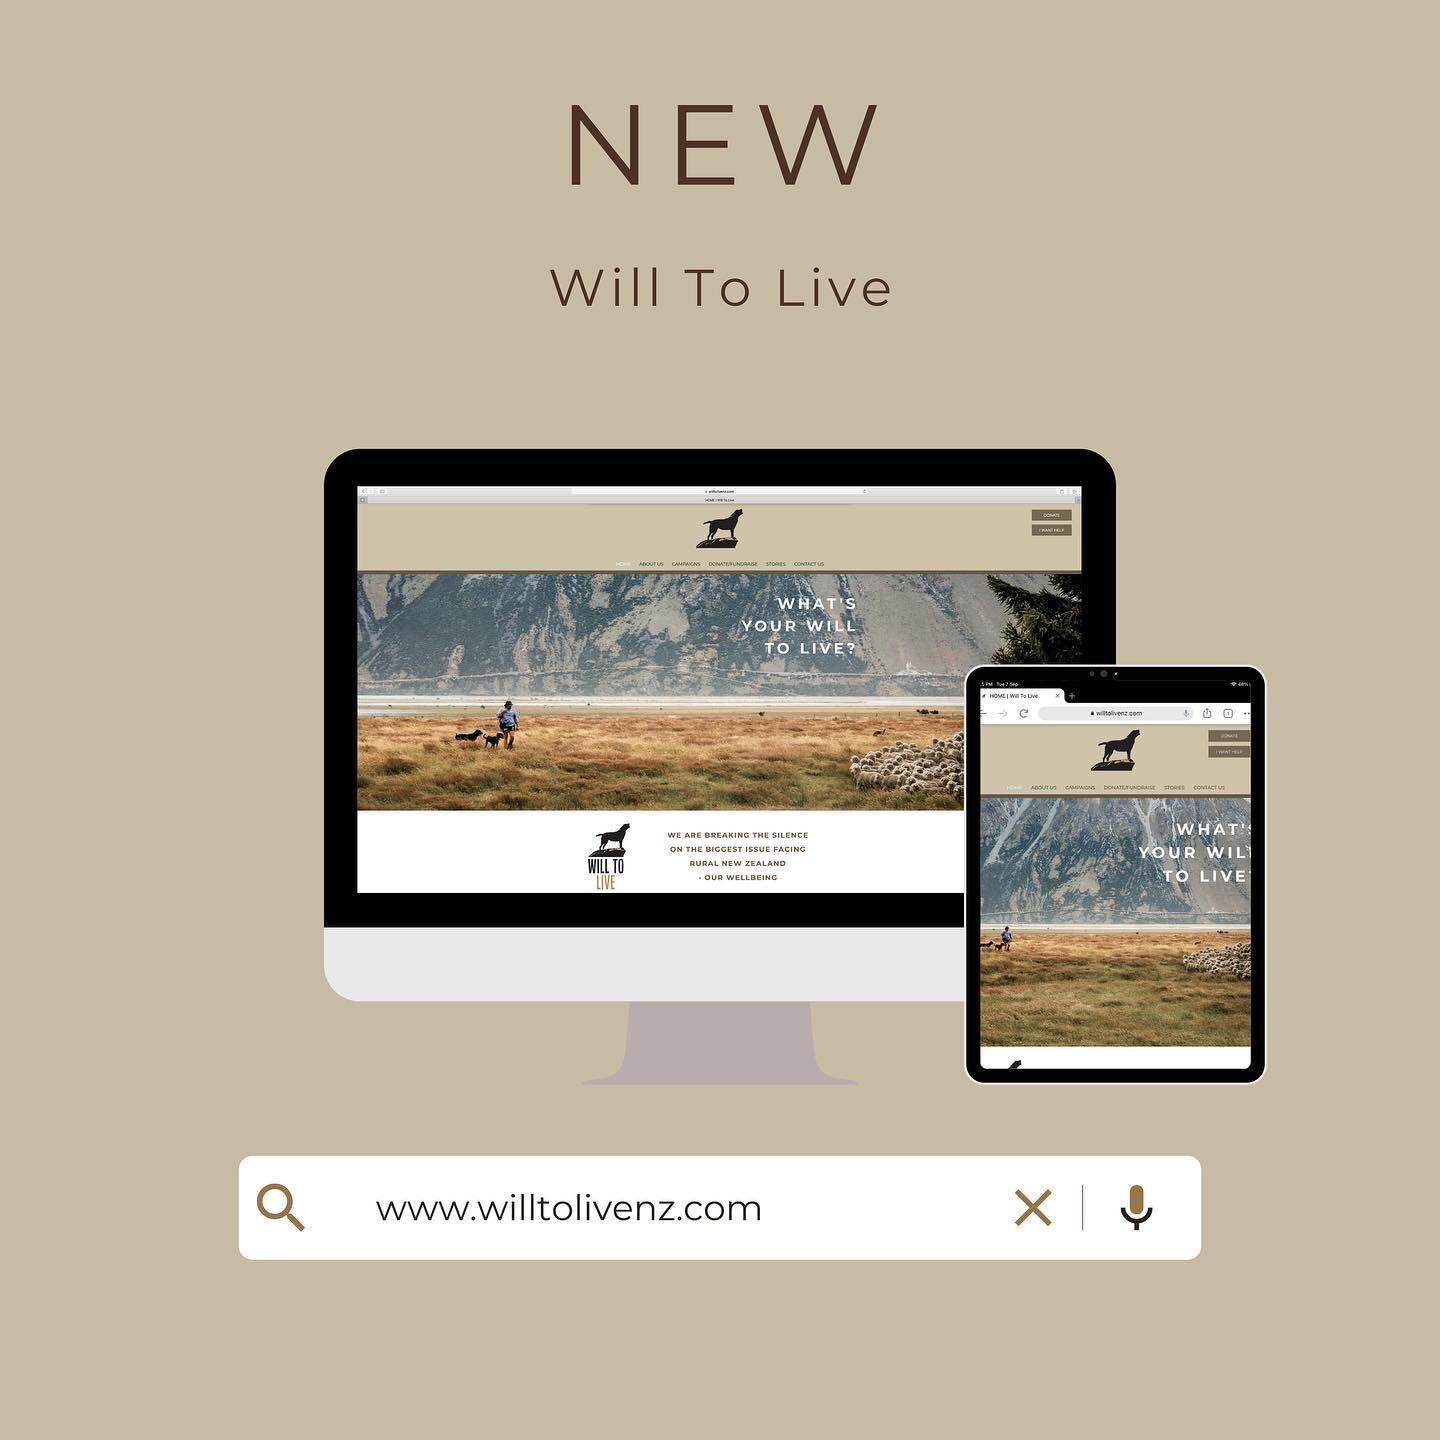 We feel so privileged to have helped out with some new design aesthetics for Will To Live, a not-for-profit organisation 100% funded by rural NZ, for rural NZ founded by Elle Perriam. A much needed NZ charity for rural NZ, and one that is close to my